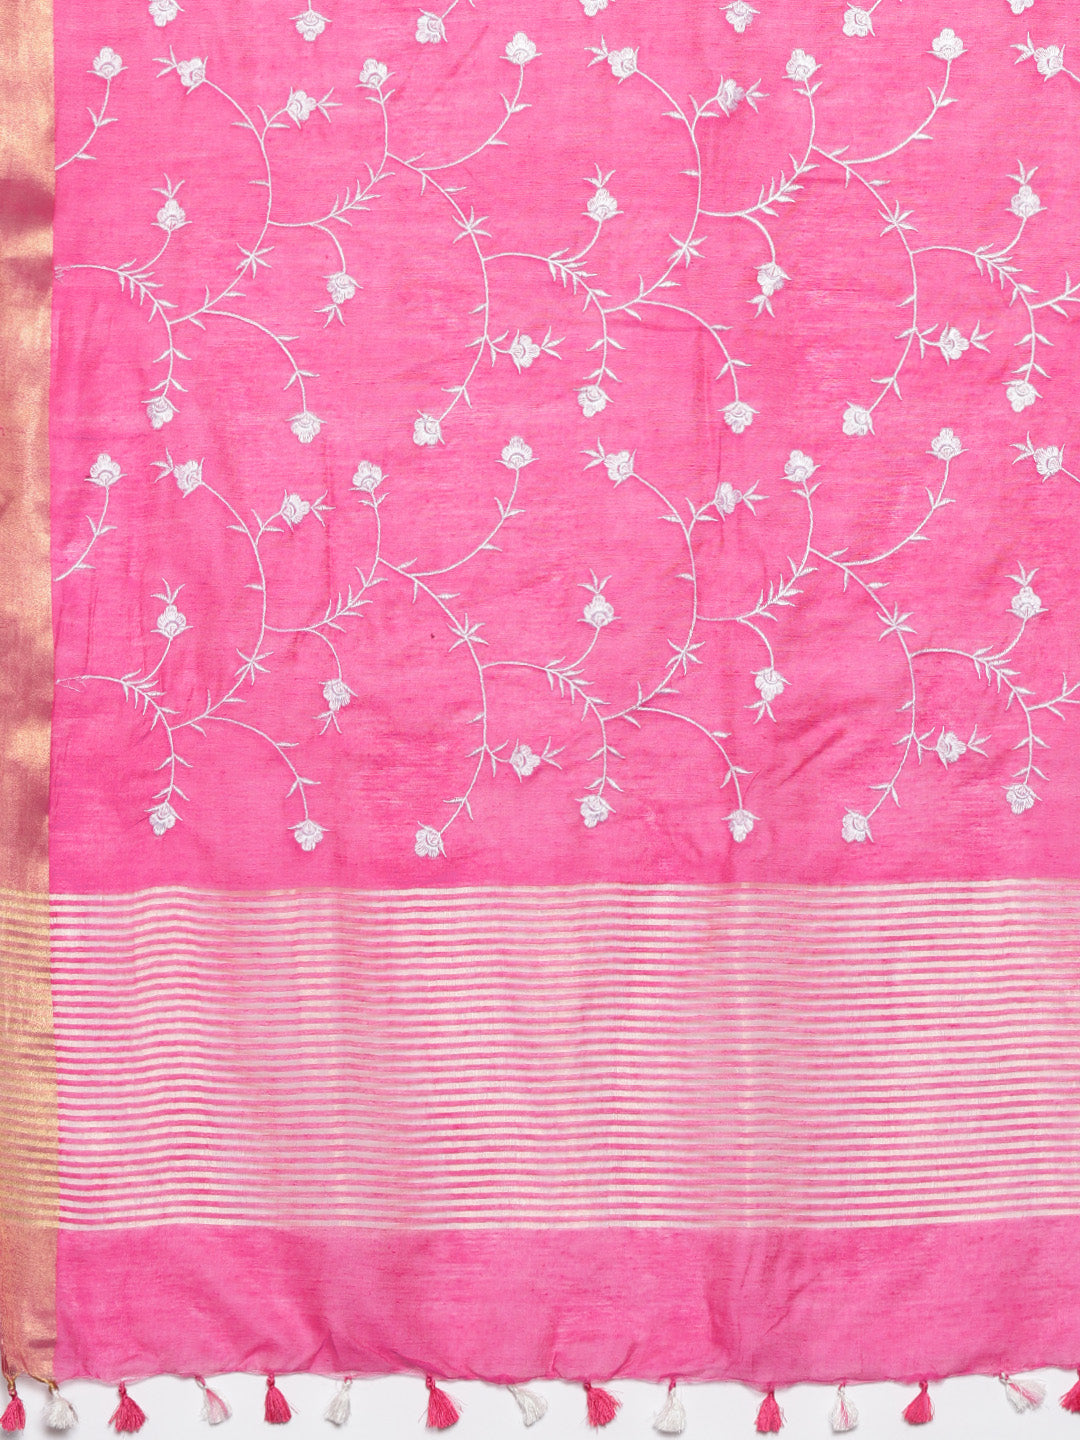 Kalakari India Kota Silk Embroidered Saree With Blouse ALBGSA0156-Saree-Kalakari India-ALBGSA0156-Geographical Indication, Hand Crafted, Heritage Prints, Linen, Natural Dyes, Pure Cotton, Sarees, Sustainable Fabrics, Woven-[Linen,Ethnic,wear,Fashionista,Handloom,Handicraft,Indigo,blockprint,block,print,Cotton,Chanderi,Blue, latest,classy,party,bollywood,trendy,summer,style,traditional,formal,elegant,unique,style,hand,block,print, dabu,booti,gift,present,glamorous,affordable,collectible,Sari,Sare